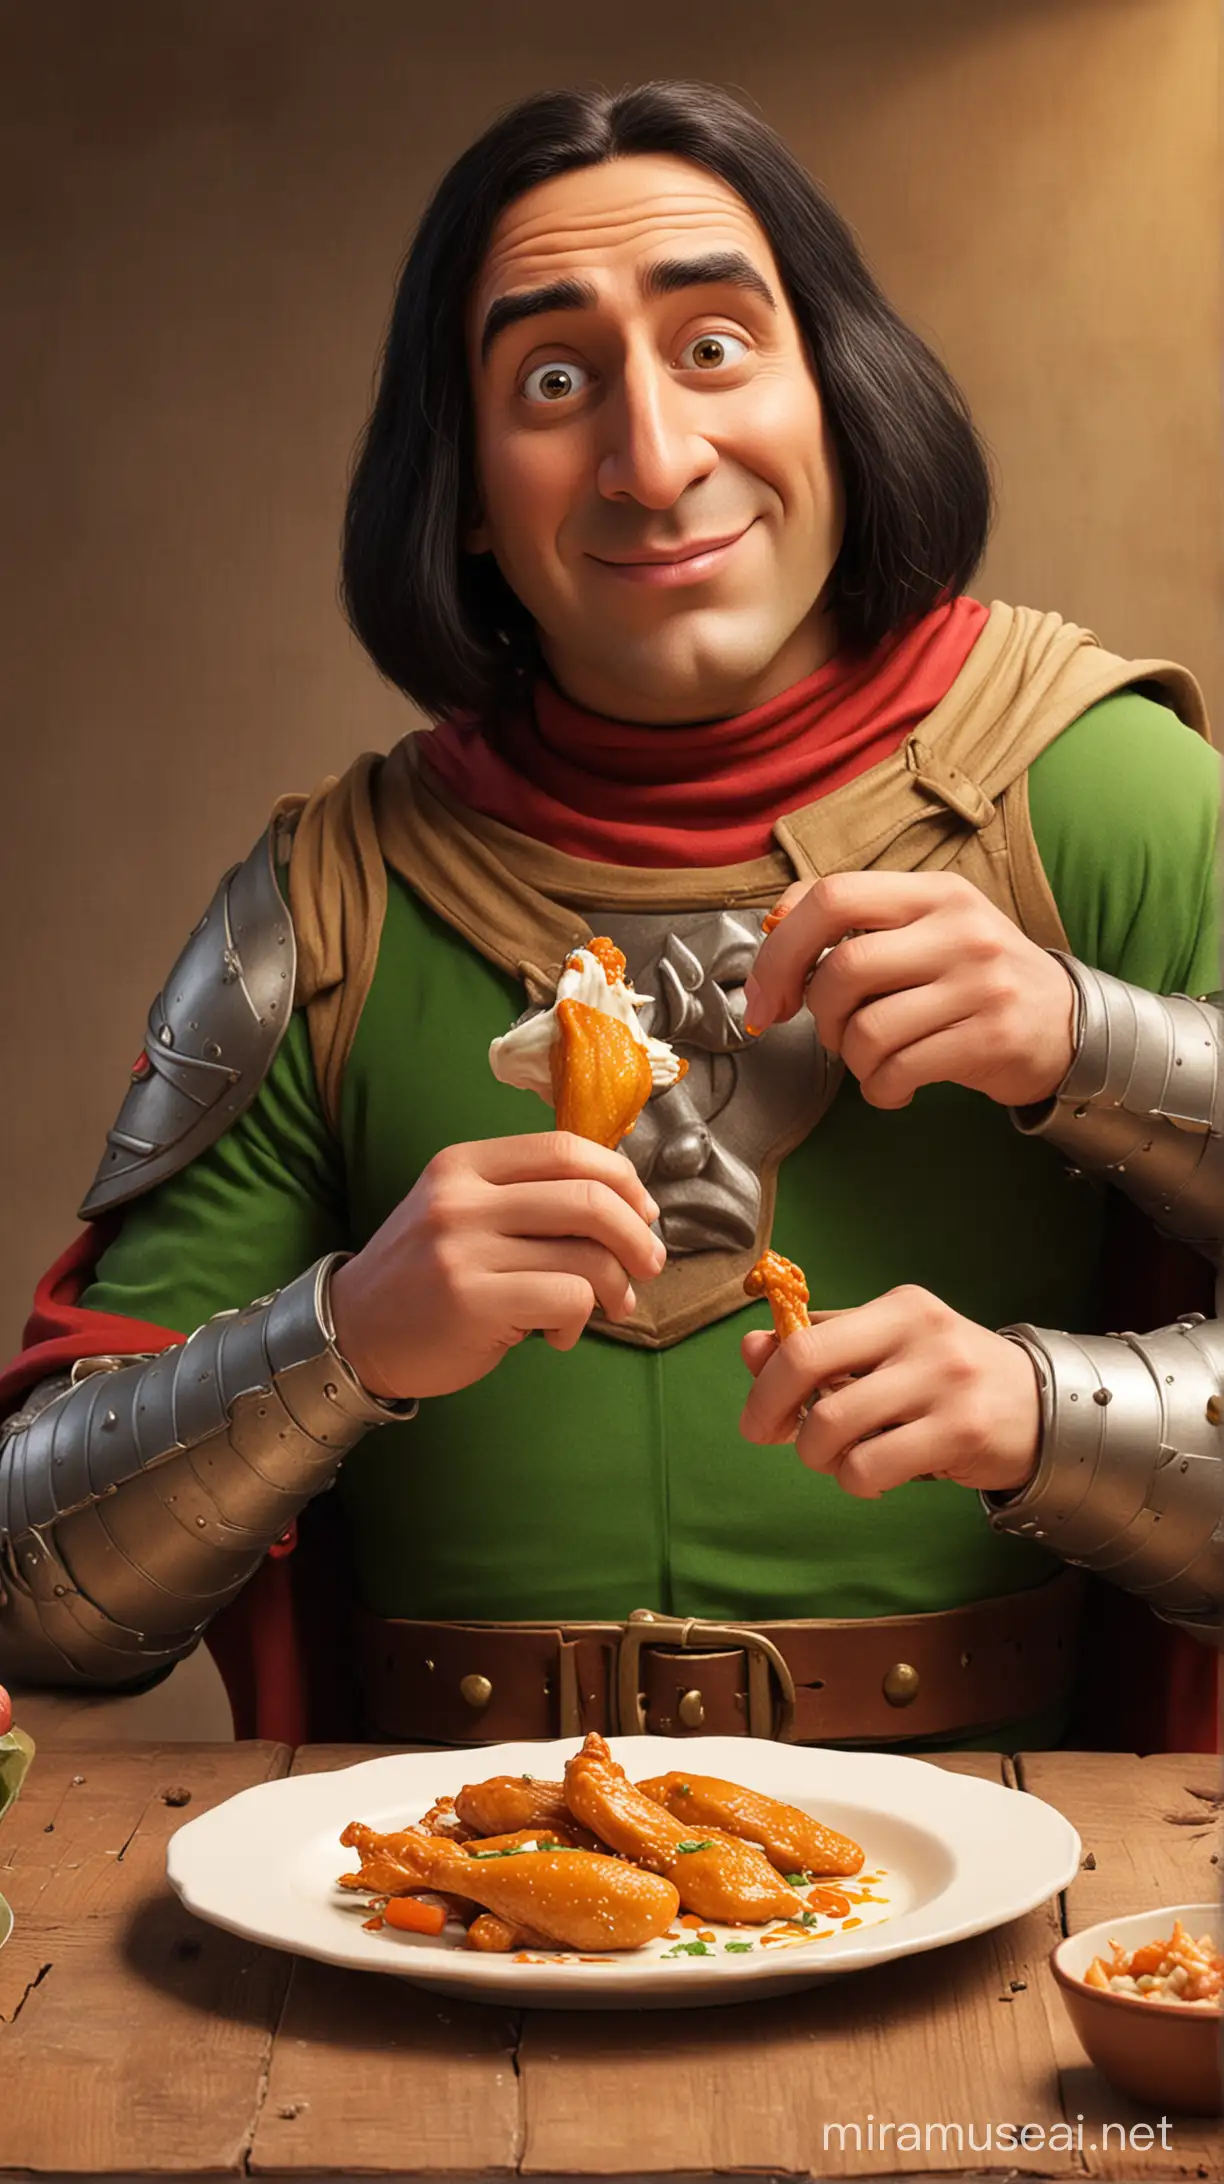 Lord farquaad eating chicken wings with mayonnaise